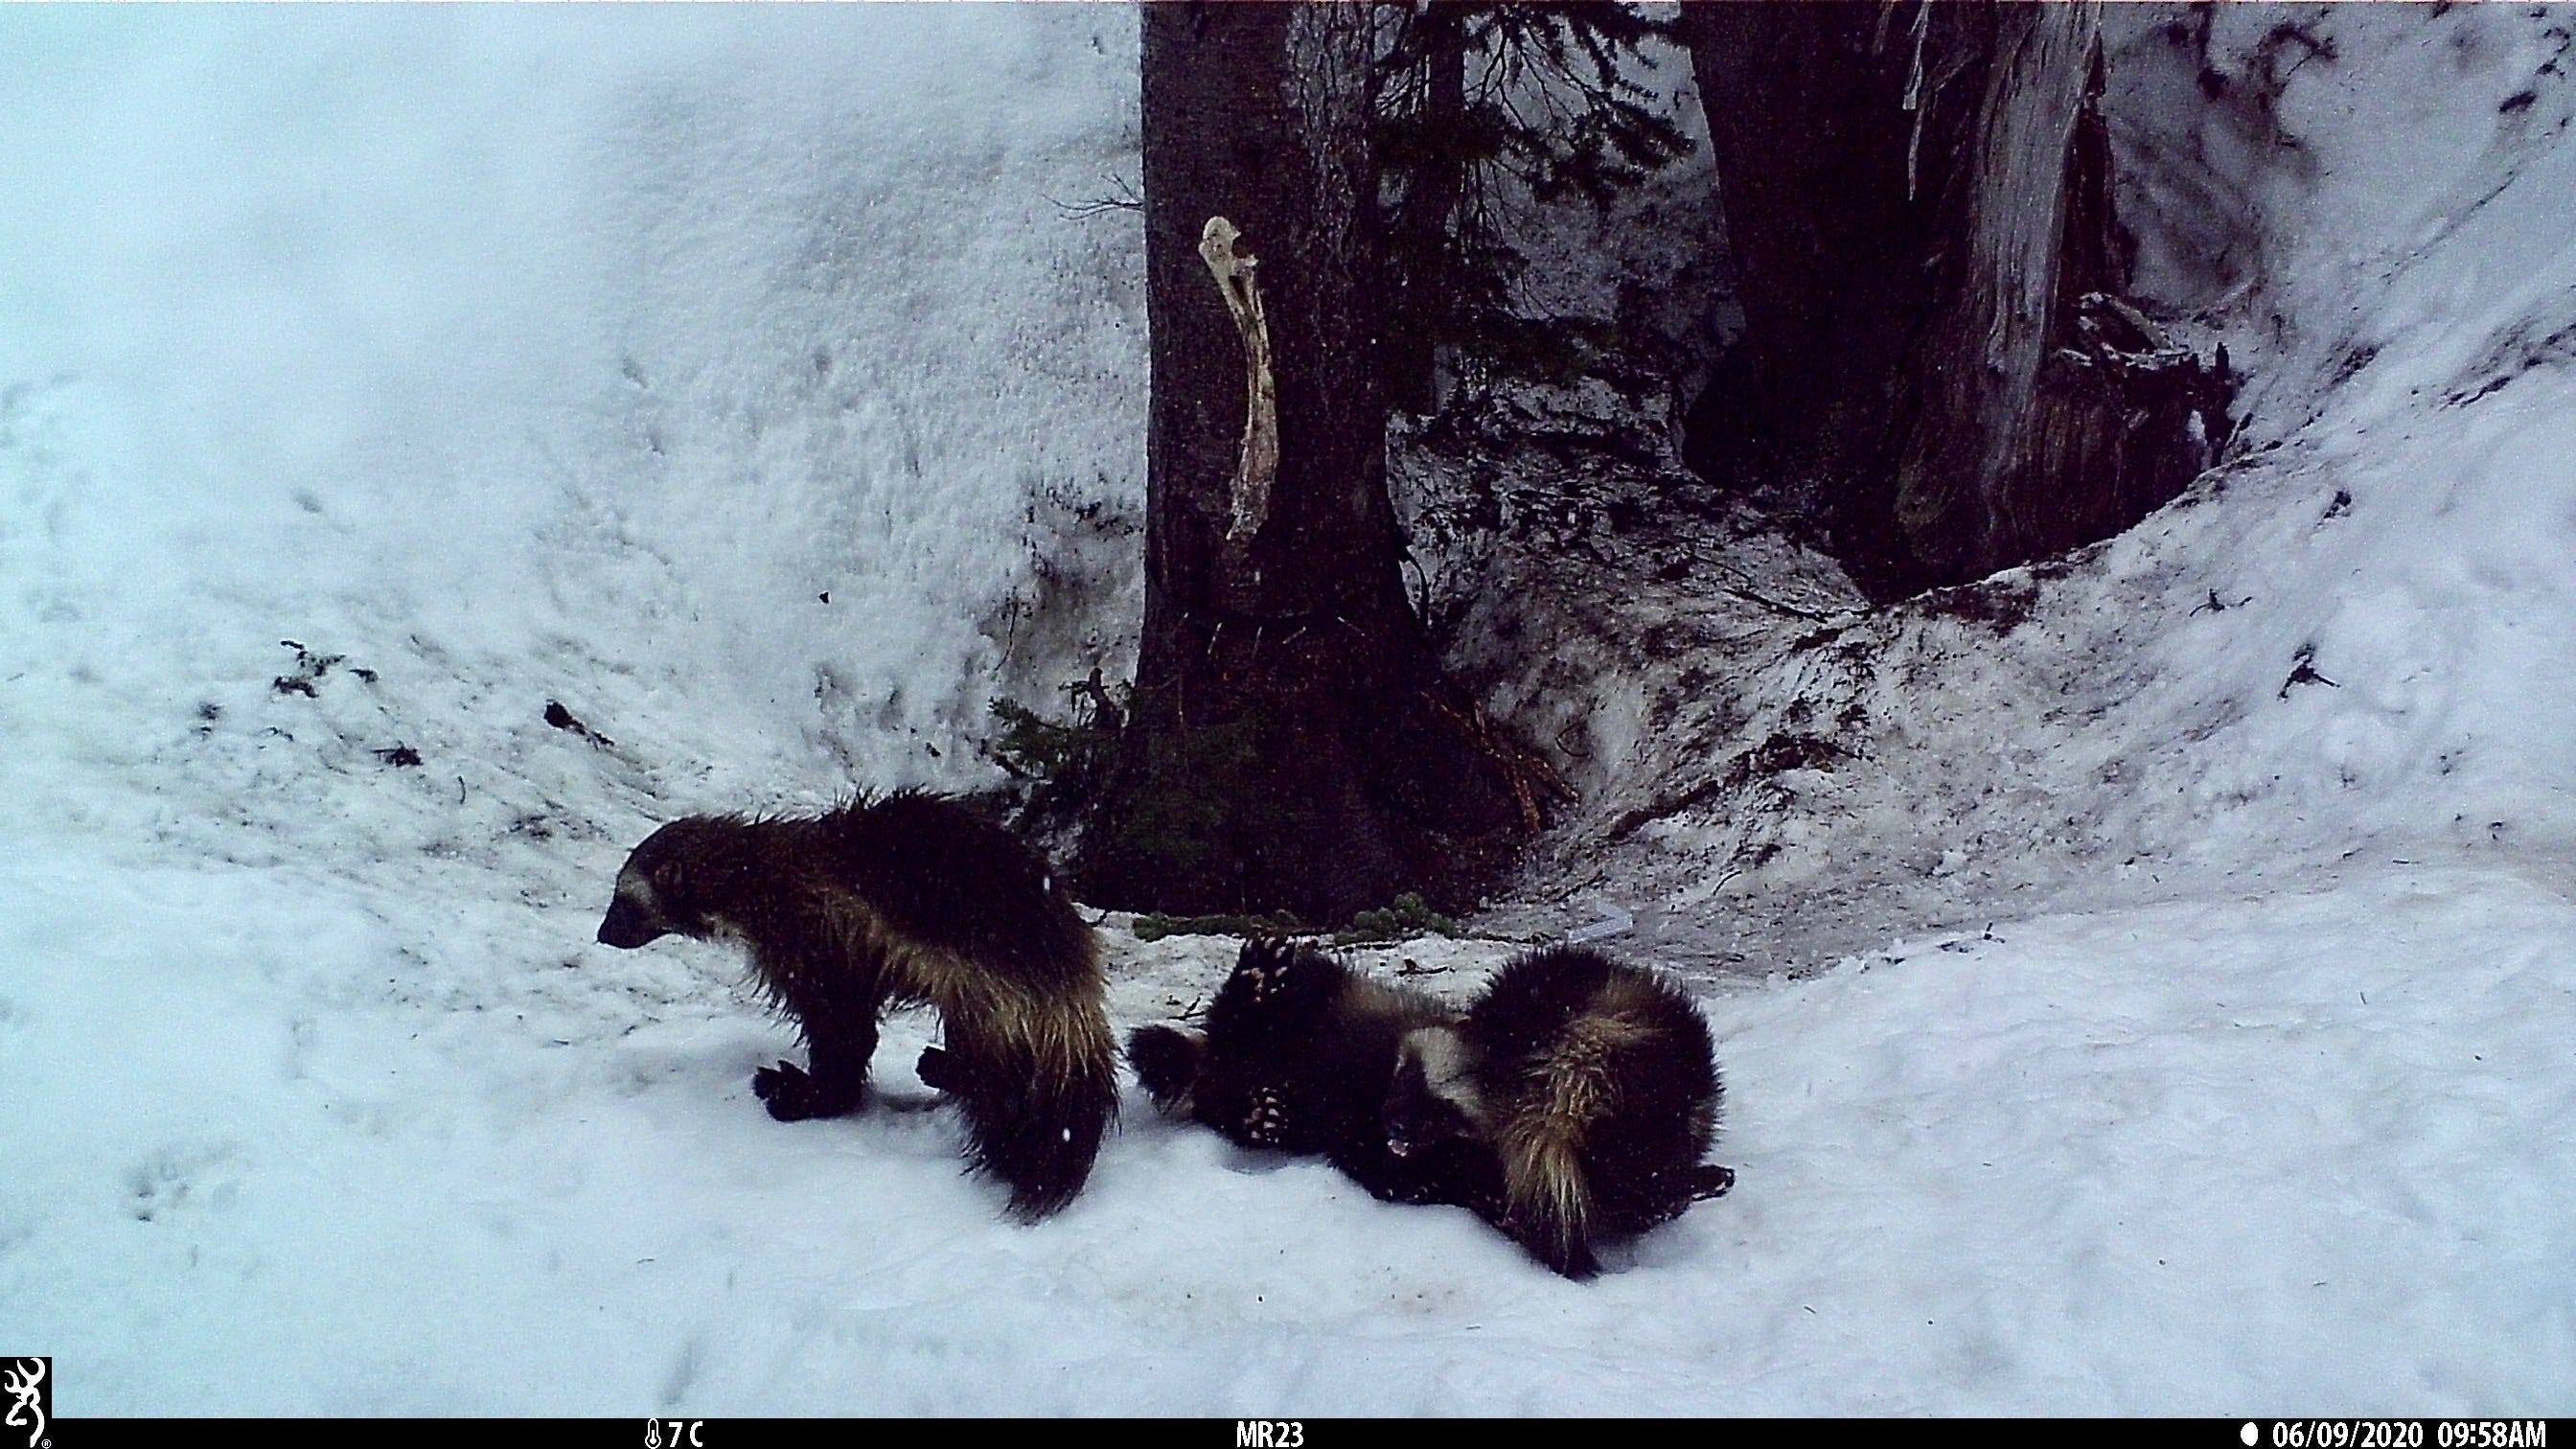 Wolverines return to place they've been unseen for 100 years